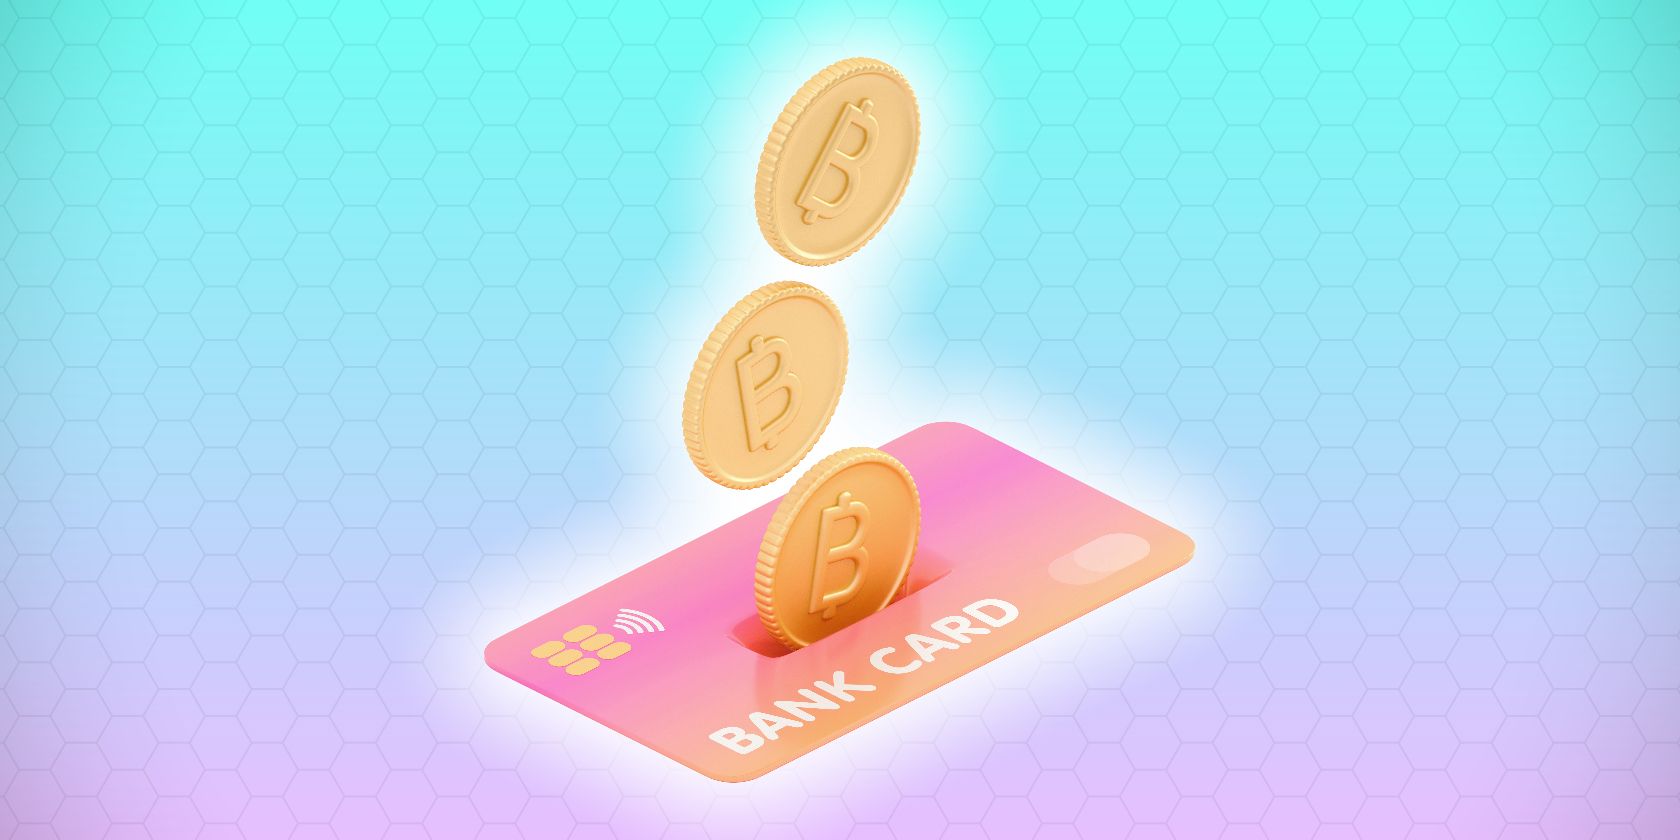 bitcoins going into bank card feature